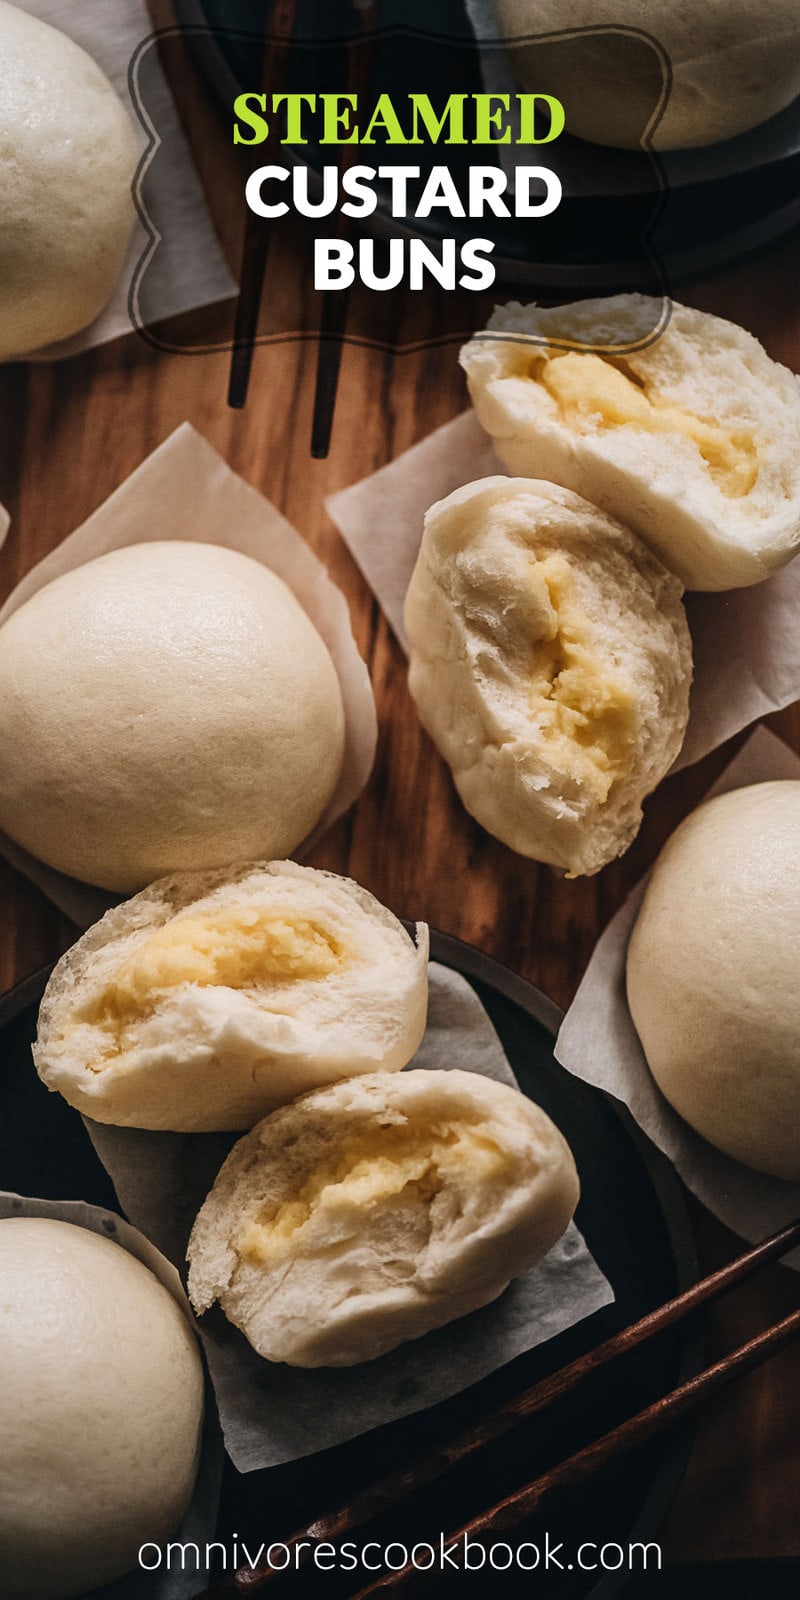 Chinese Steamed Custard Buns (nai wong bao, 奶黄包) | A dim sum classic, these buns are perfect for holiday gatherings and parties as well. Made with a yeast dough and steamed, the buns have a super soft and spongy texture with a smooth surface. The custard filling is creamy, fragrant, and sweet. The recipe includes detailed step-by-step pictures to help you recreate the restaurant-style custard buns in your own kitchen.